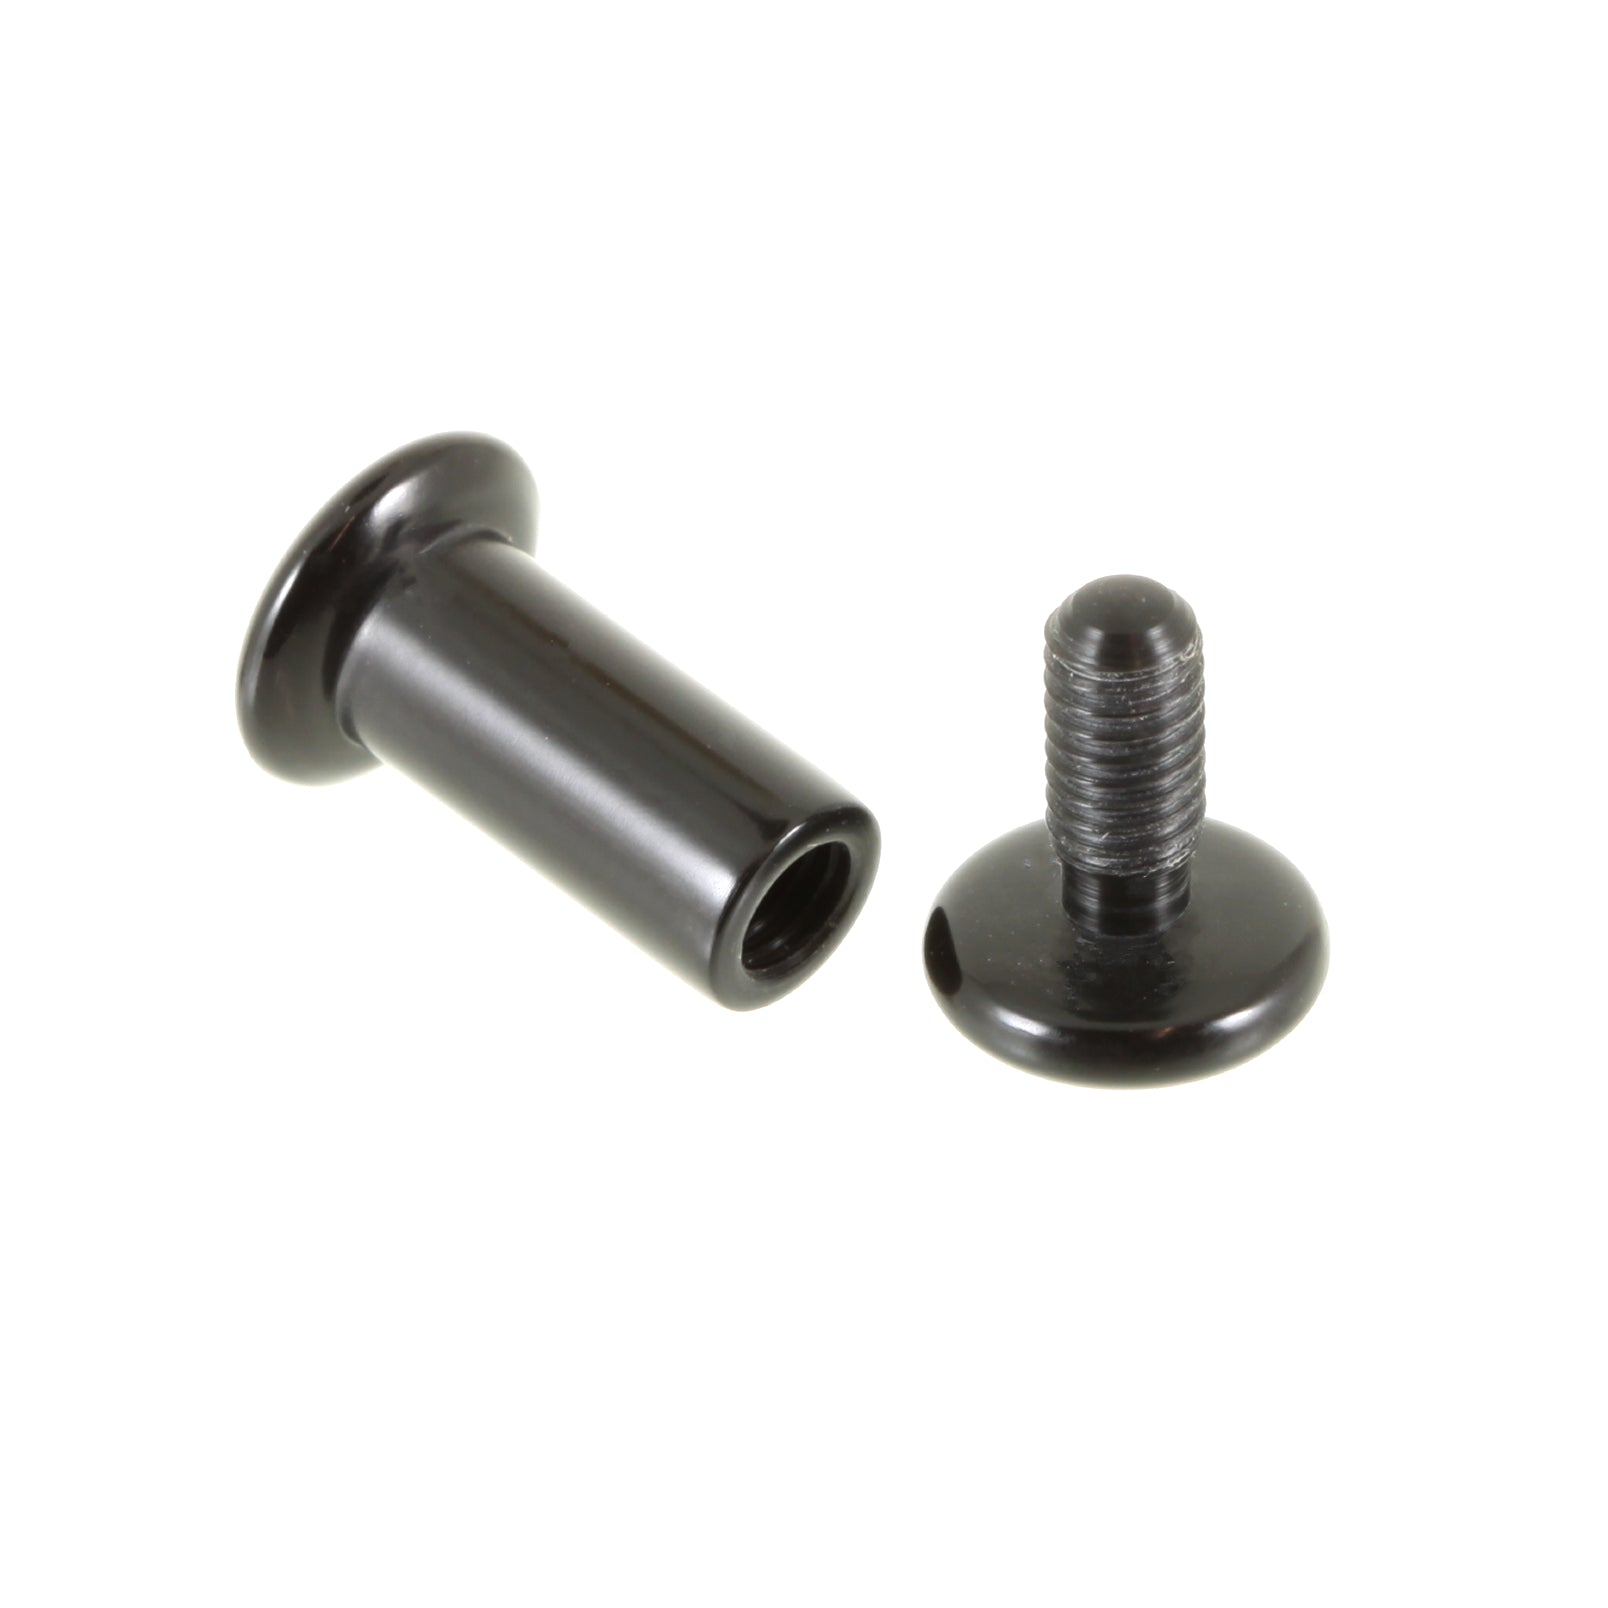 Delrin Threaded Barbells - Soft Dome Ends